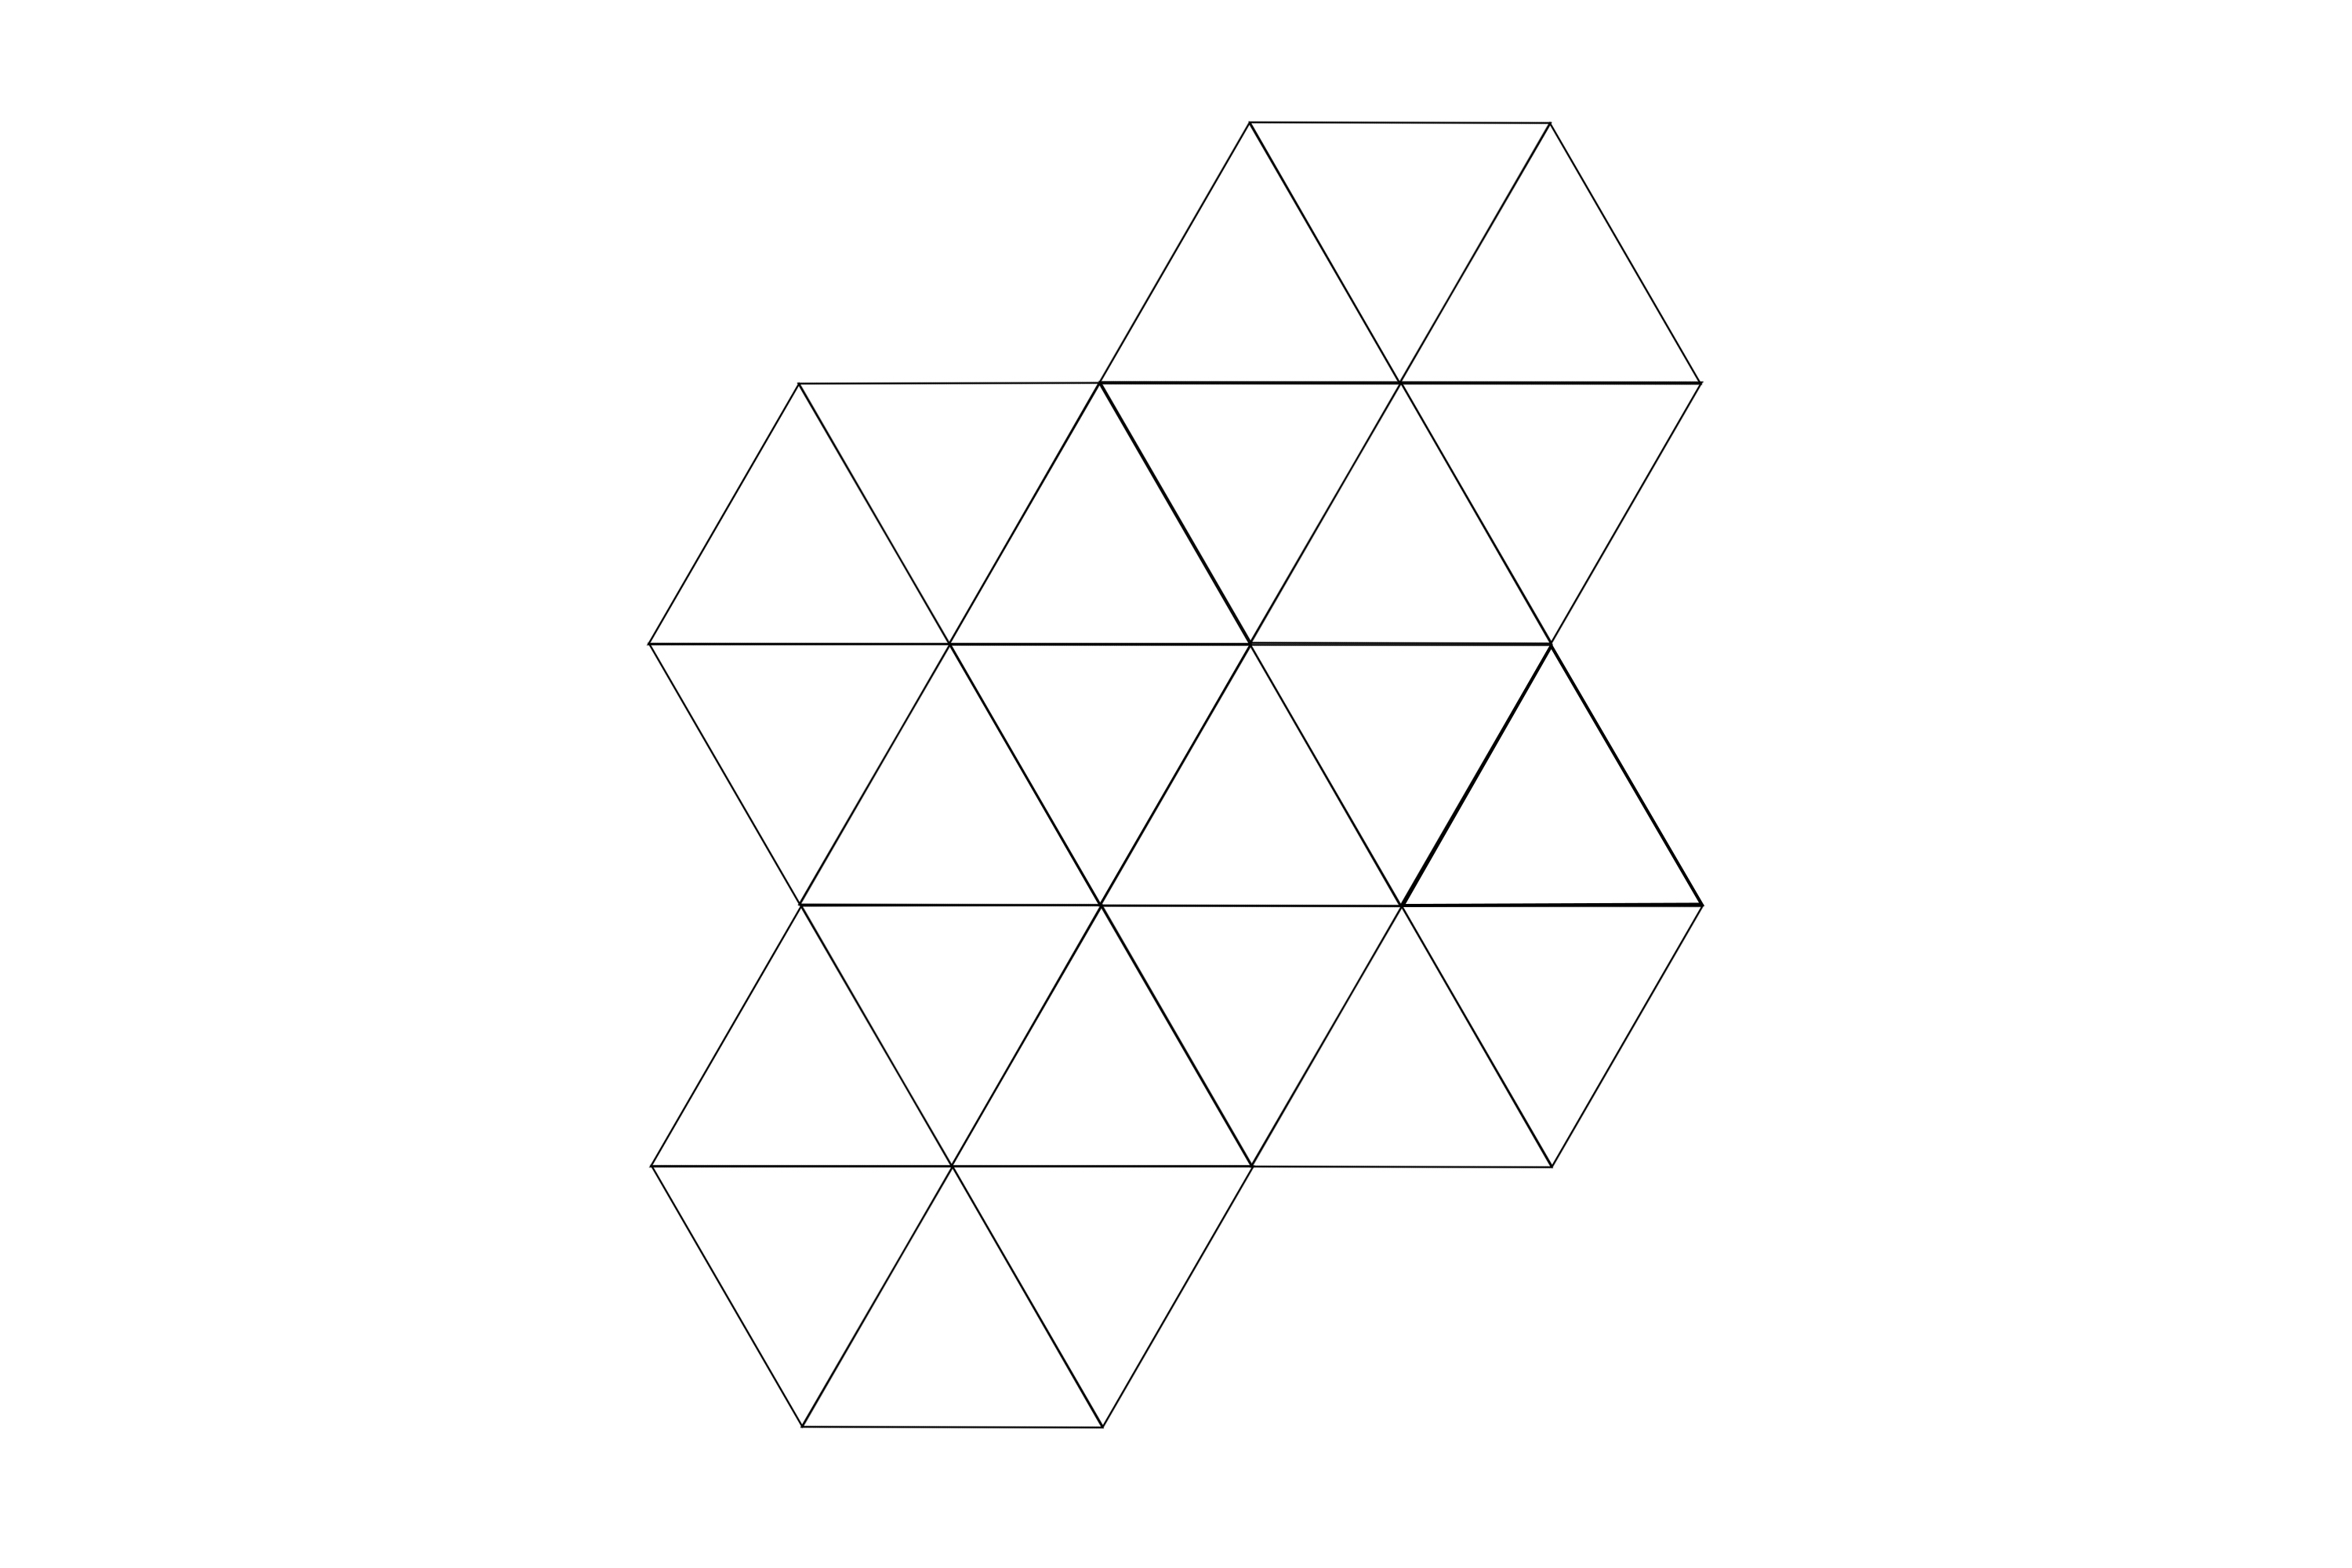 Write each internal angle size of this tessellation of equilateral triangle